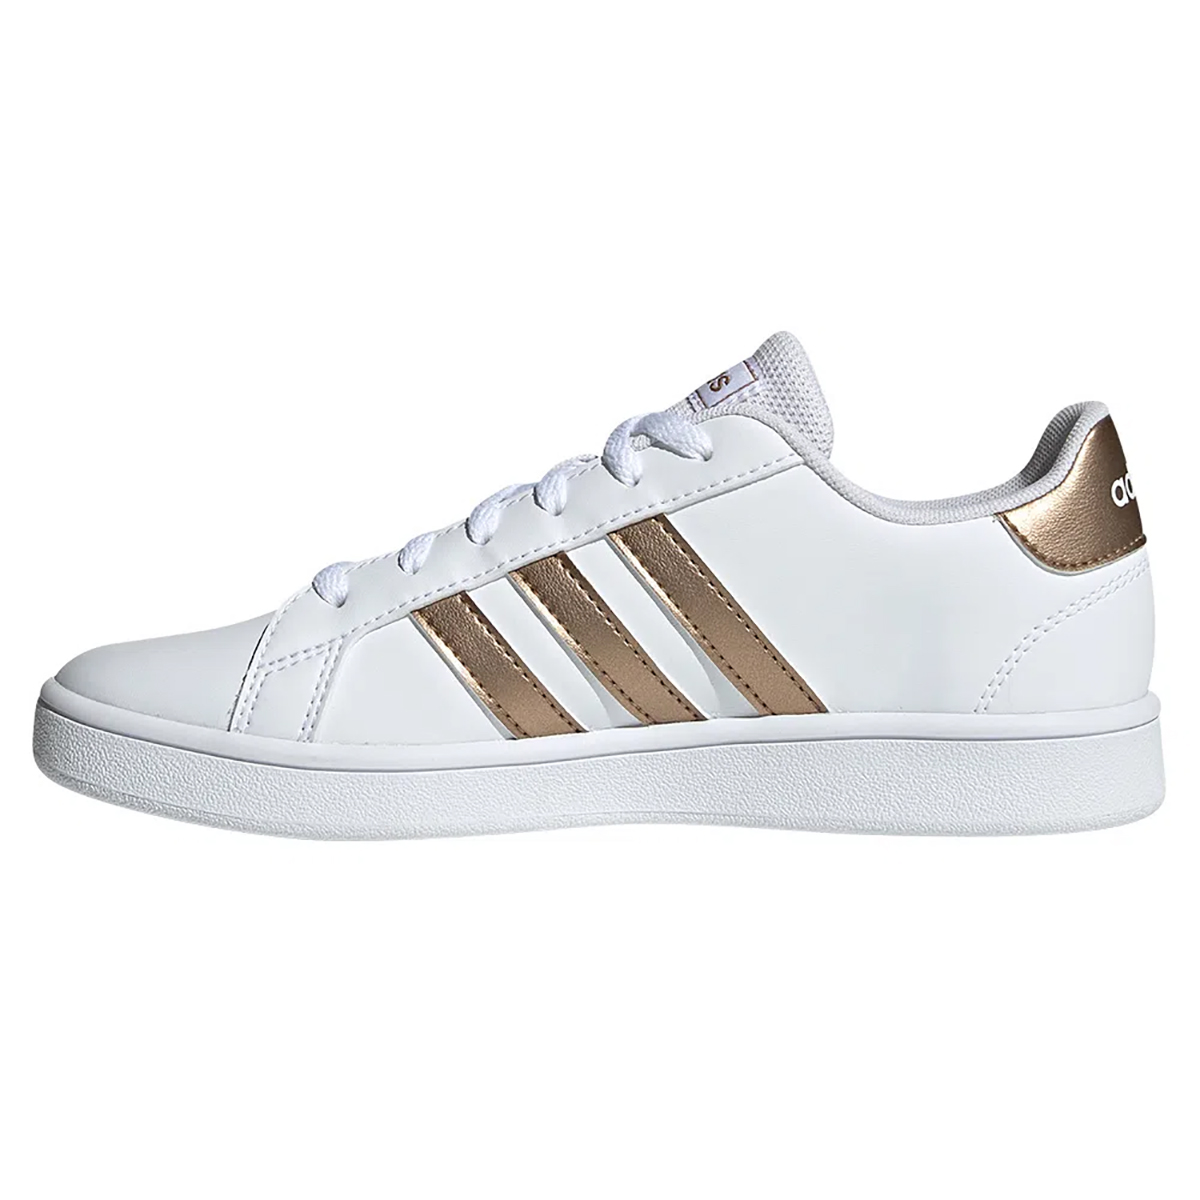 Zapatillas adidas Grand court,  image number null